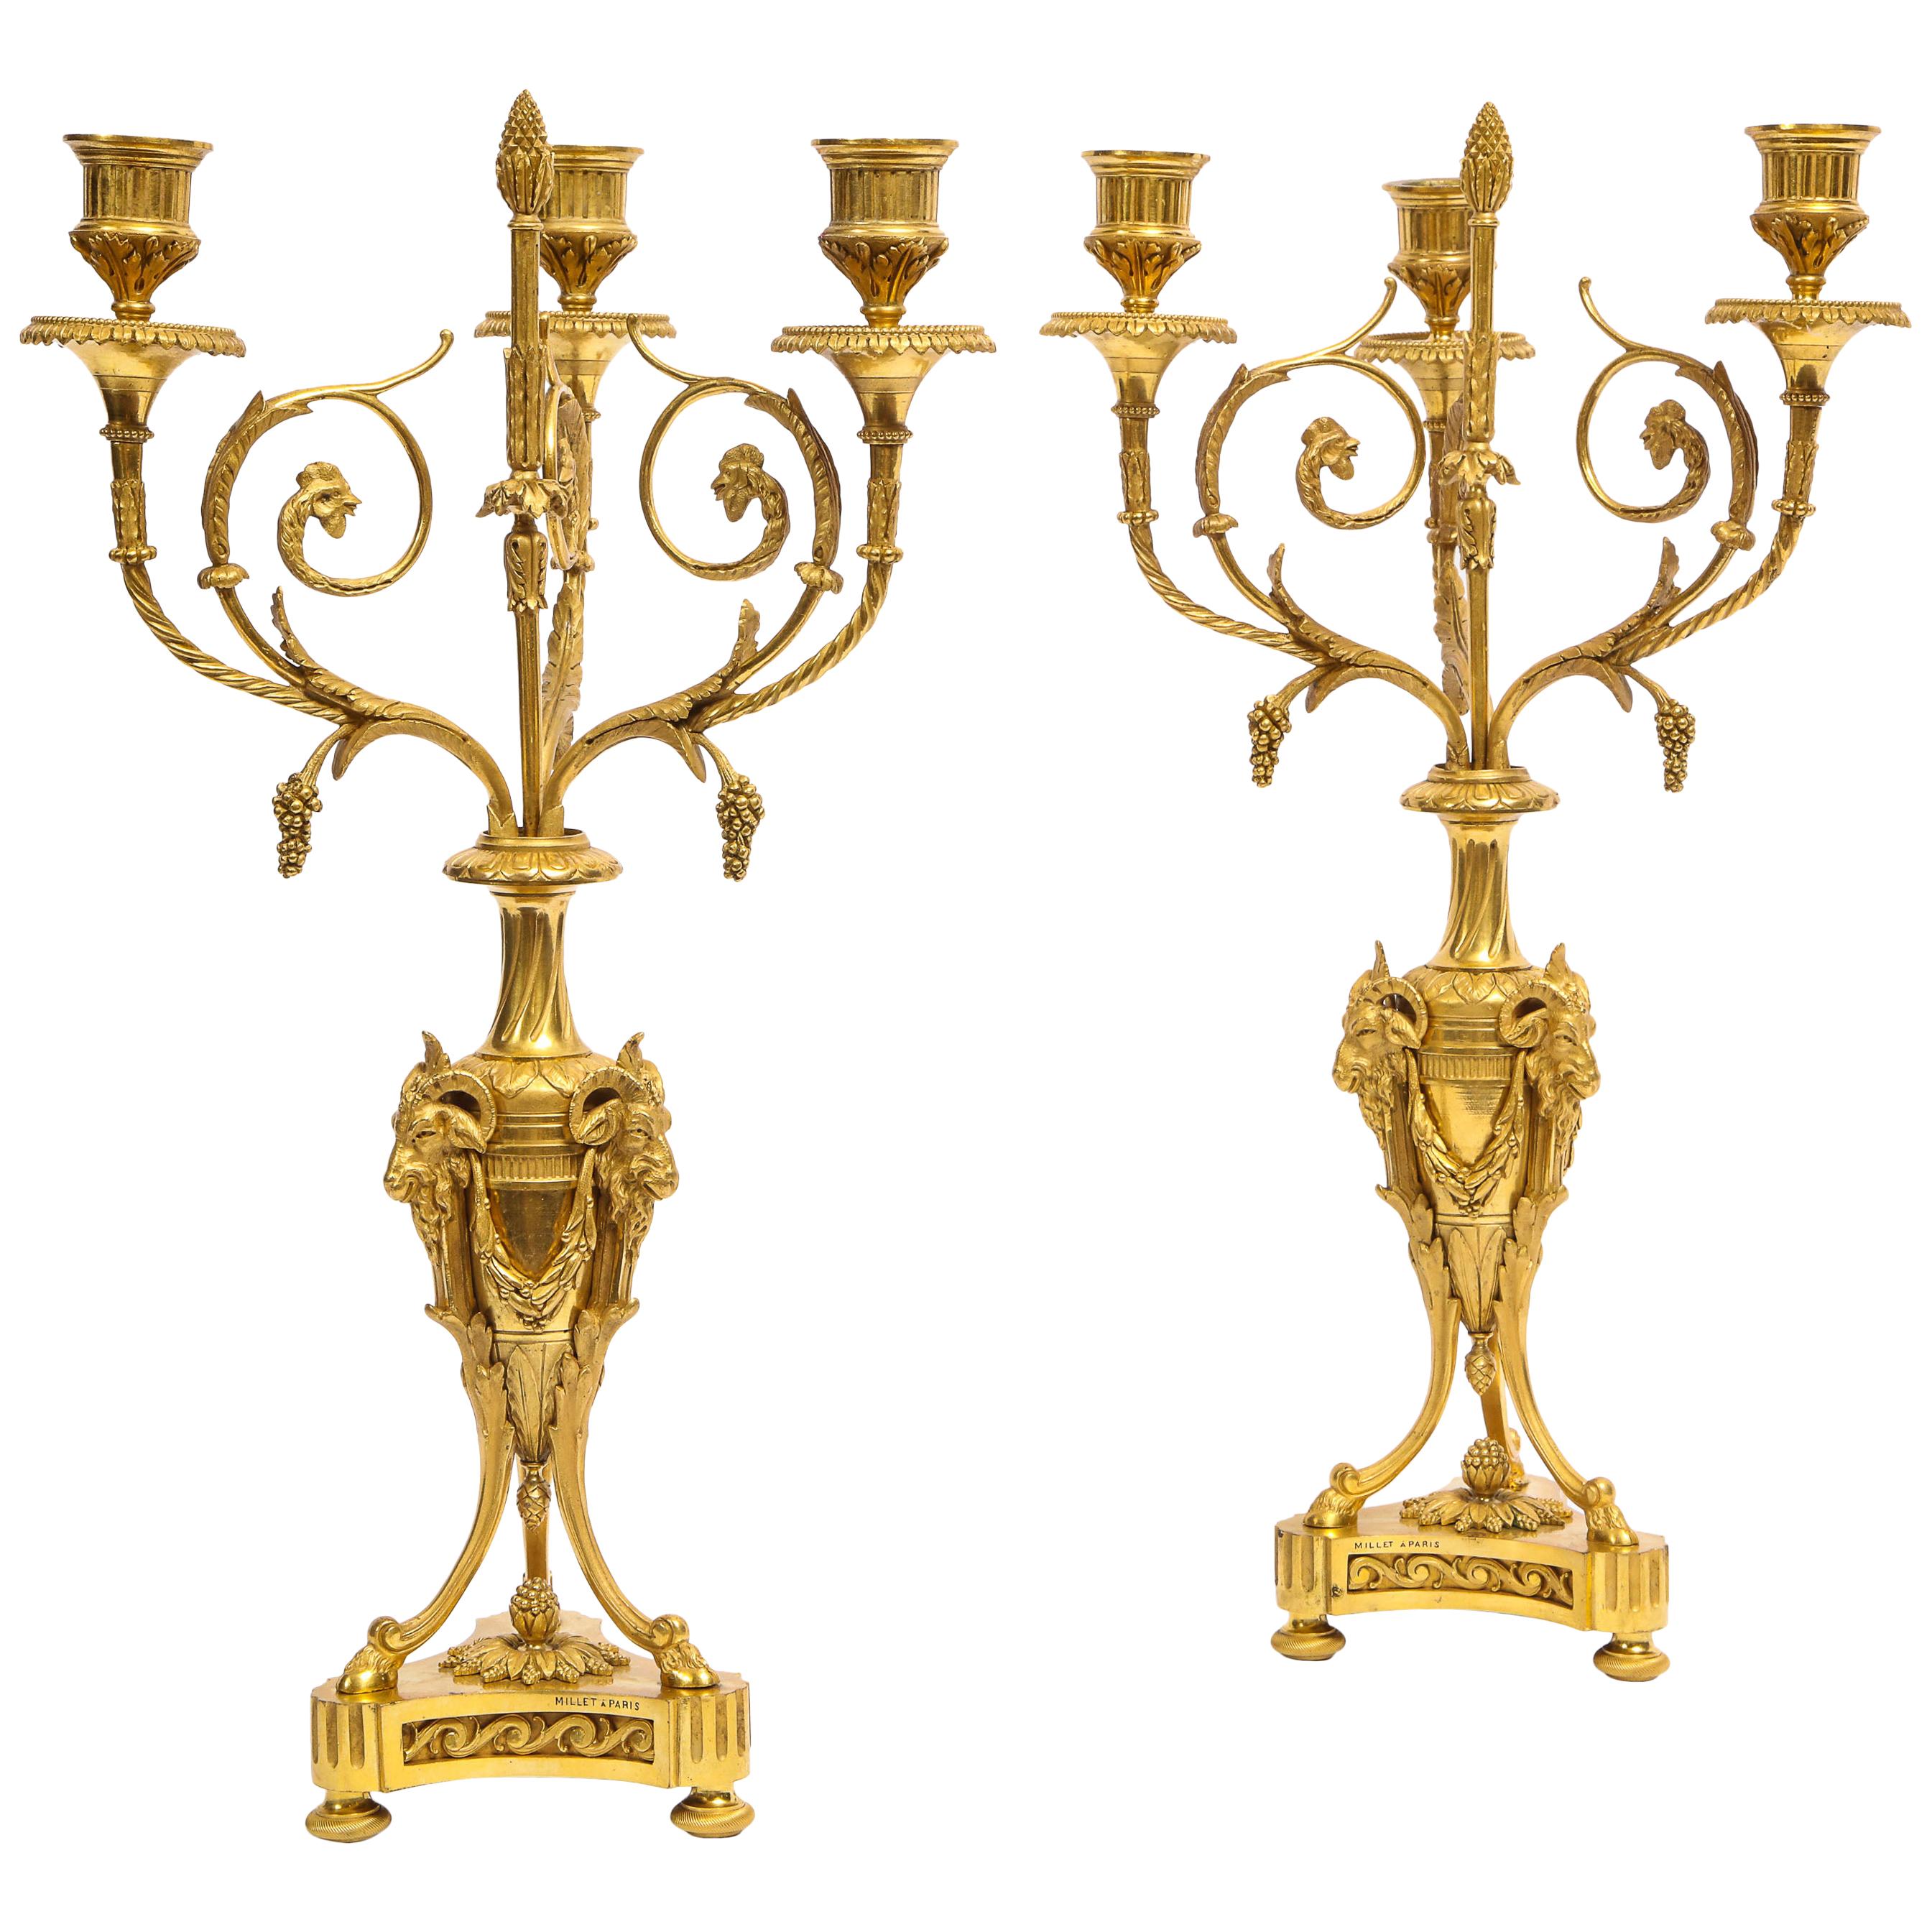 Pair of French Louis XVI Style Dore Bronze Three-Arm Candelabras, Signed Millet